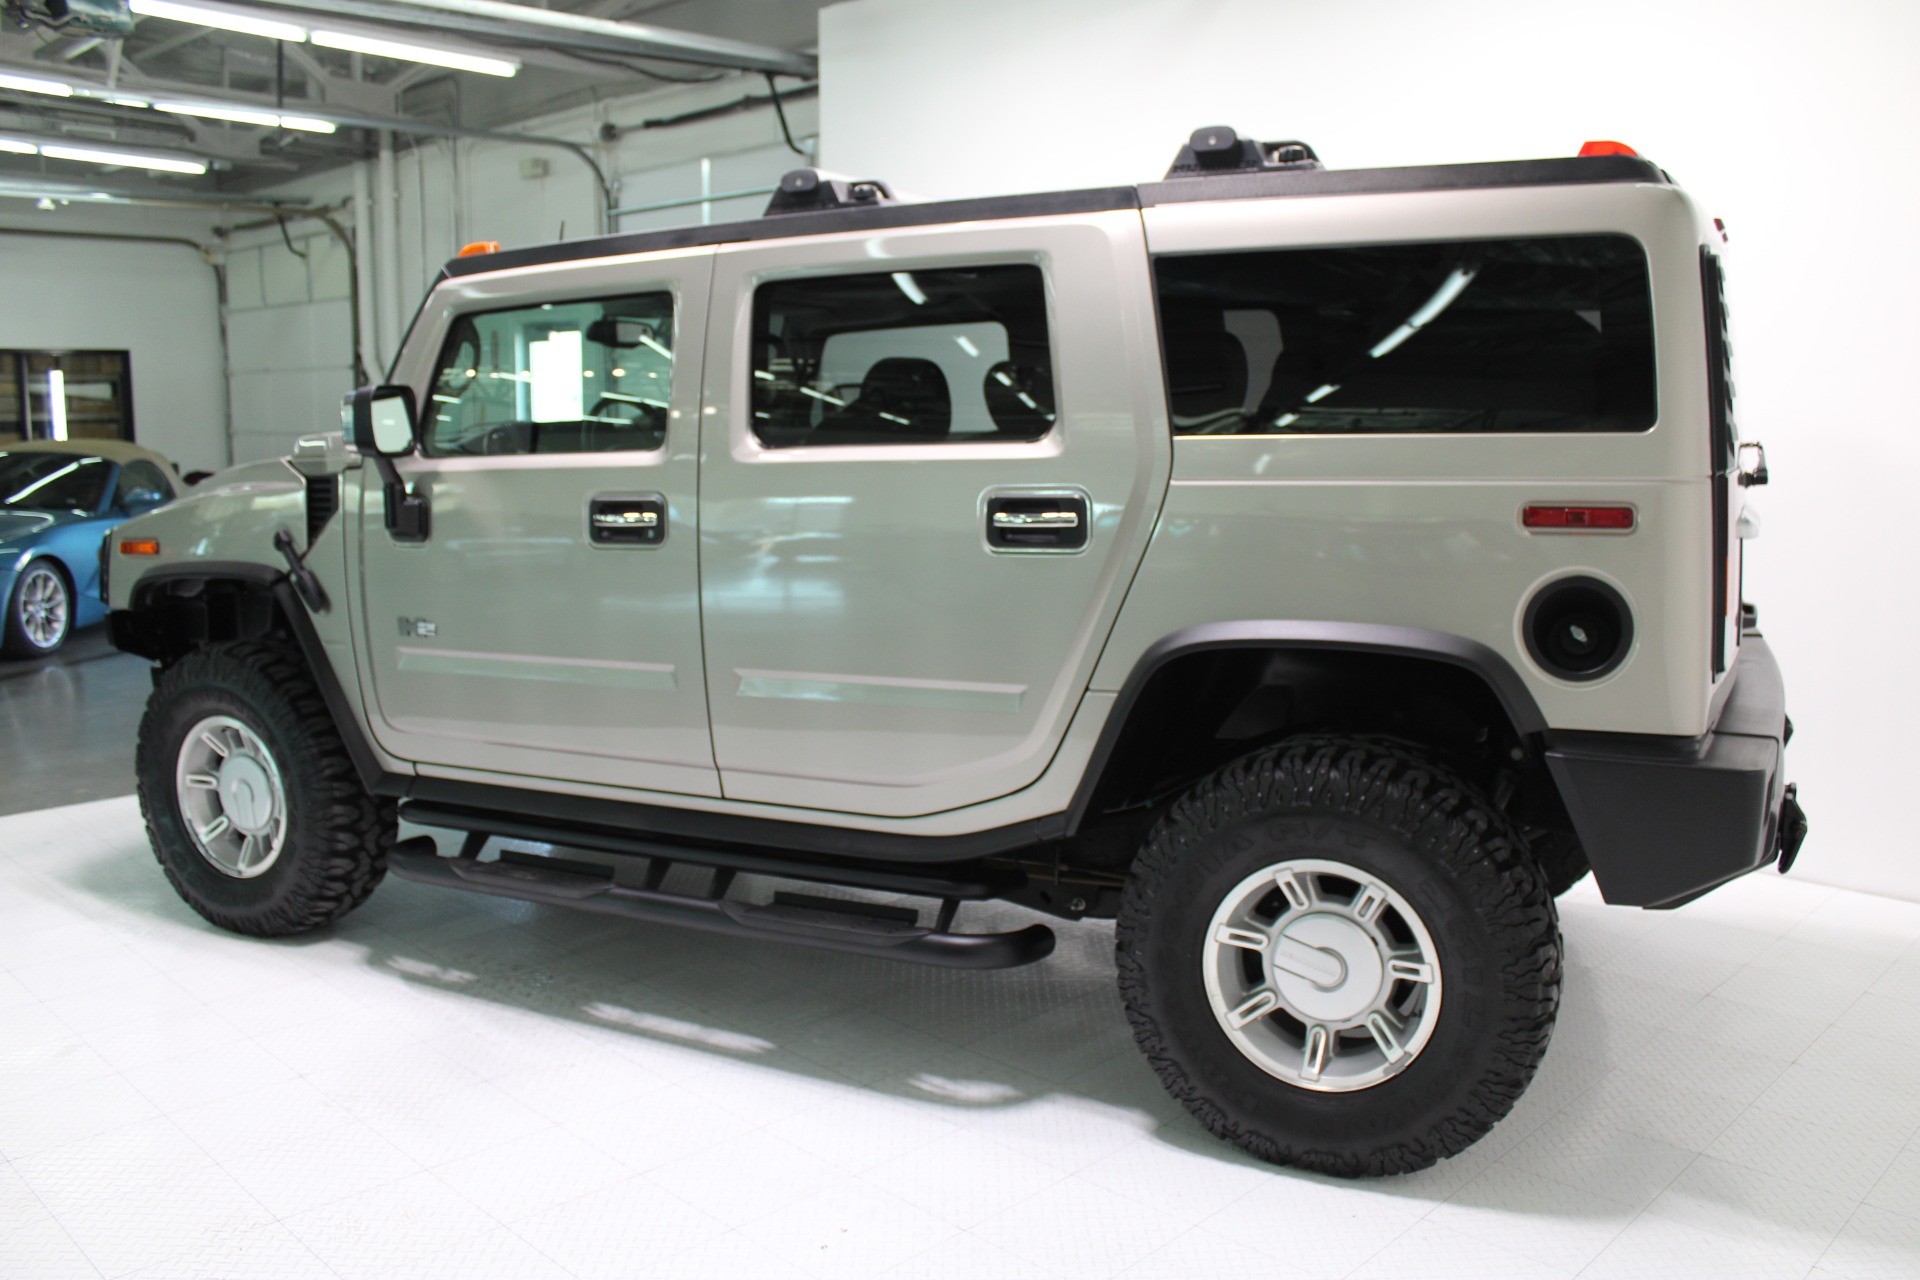 Used-2003-HUMMER-H2-SUV-Chevelle